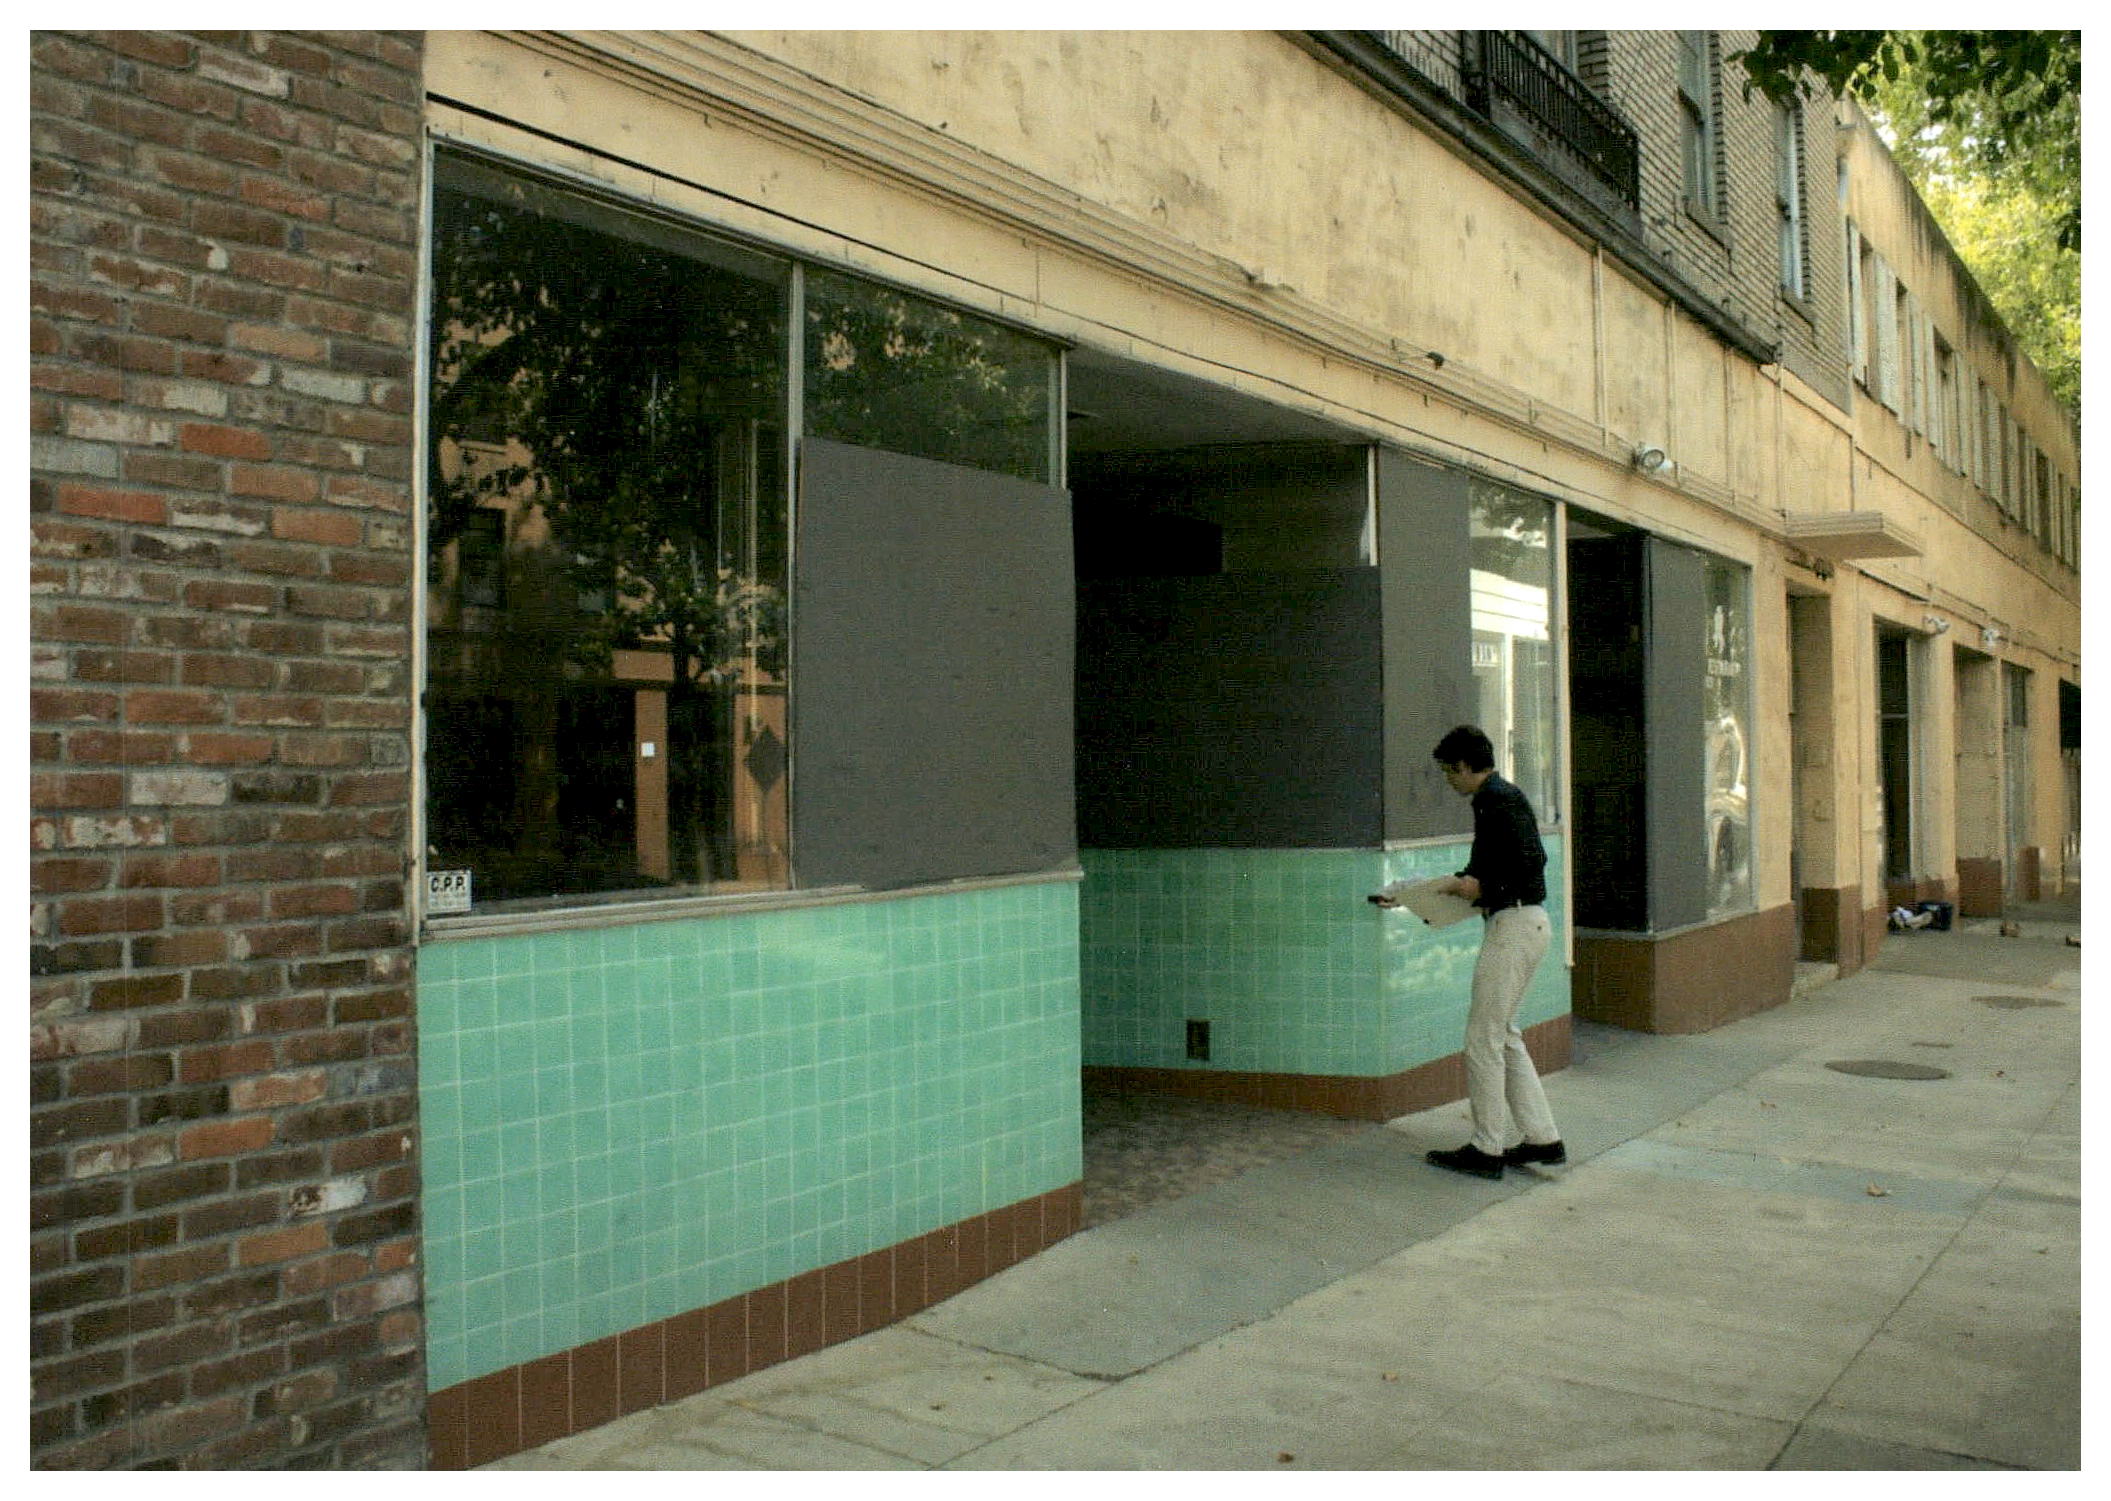 Before: sidewalk view of existing non-original storefronts.